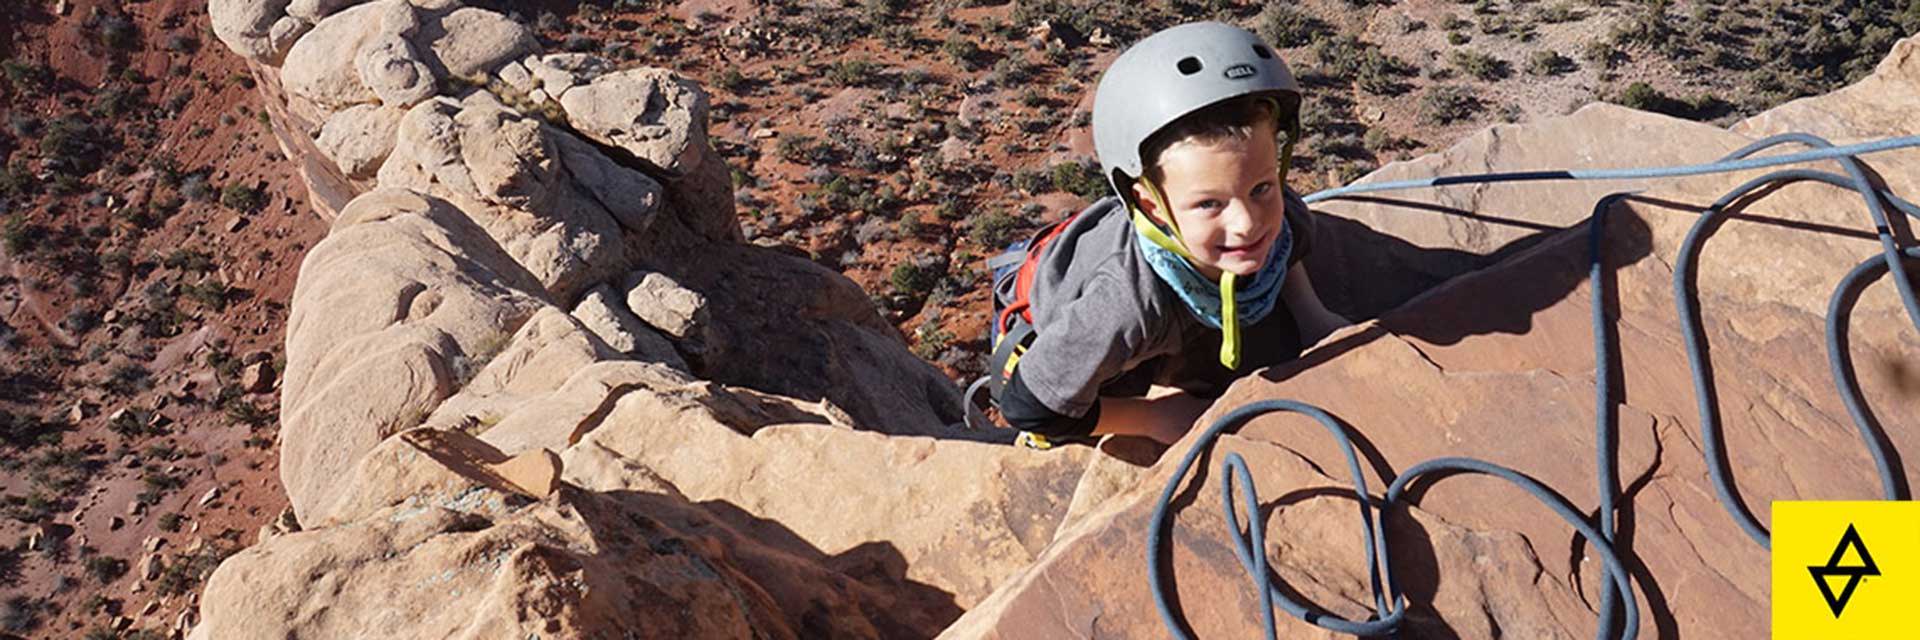 image of Rob Pizem climbing with his son